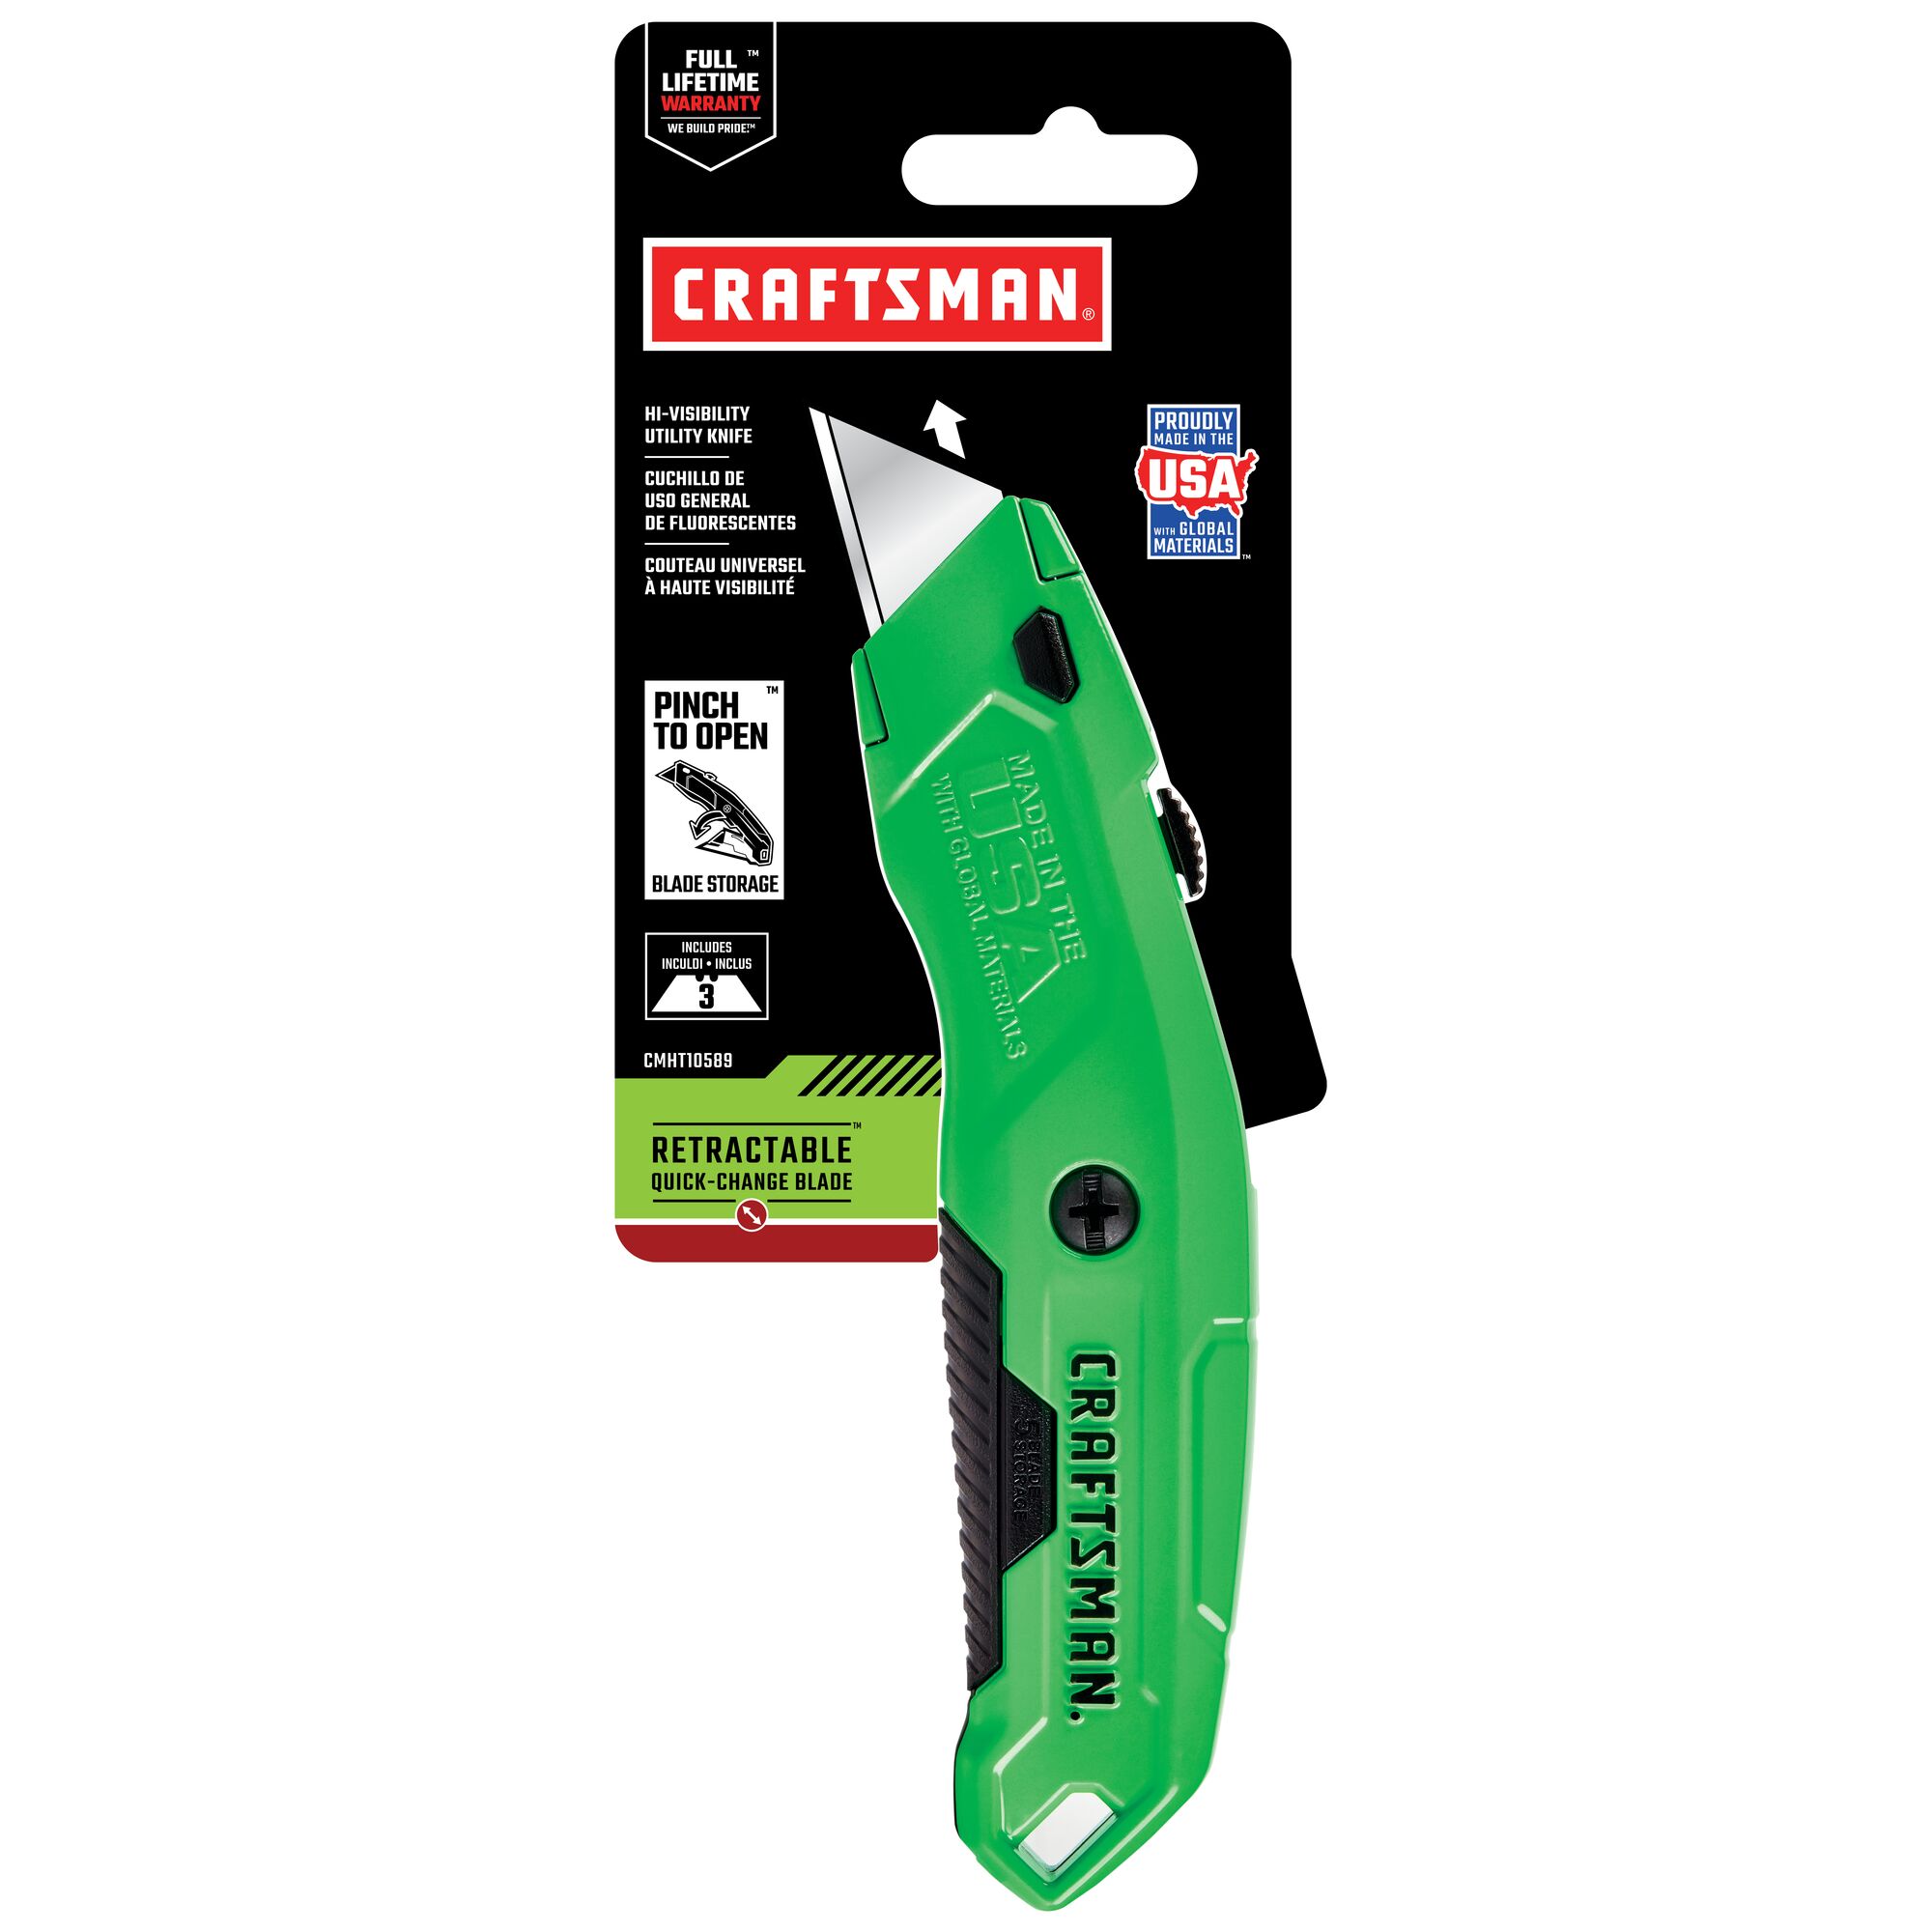 RETRACTABLE CUTTER Utility Knife With Auto-Lock Design Red & Green